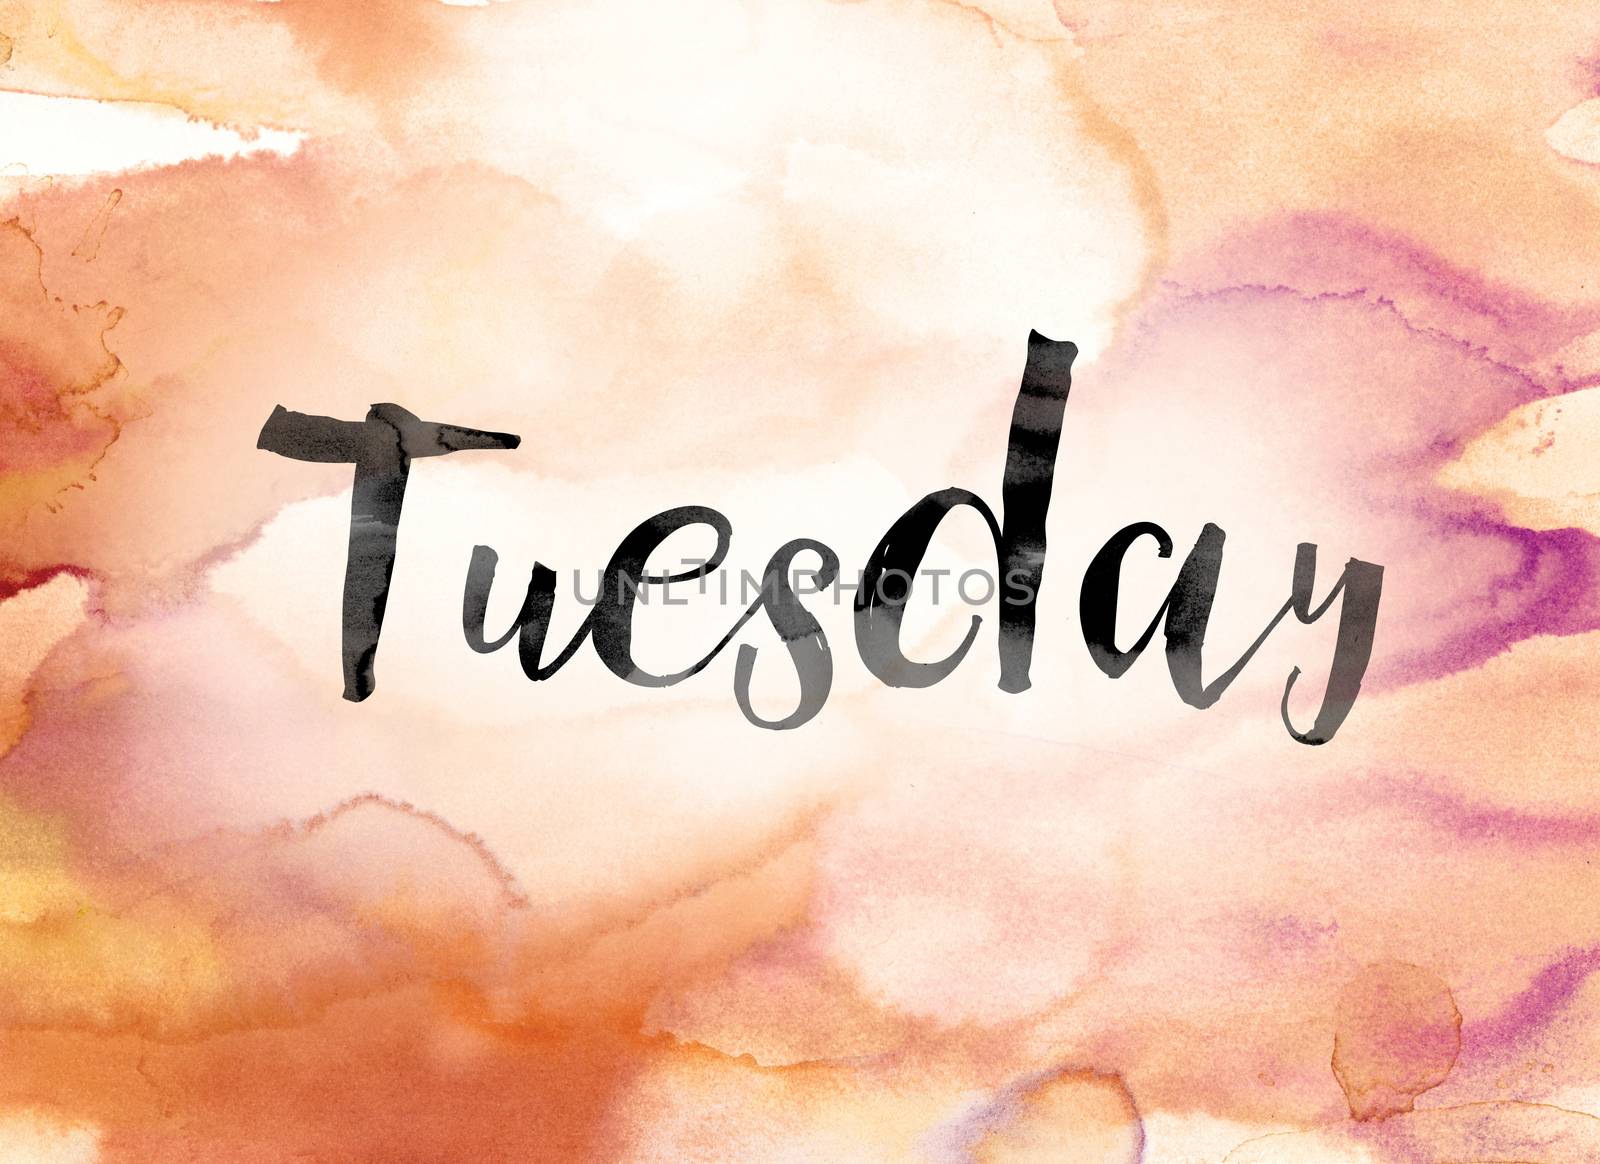 Tuesday Colorful Watercolor and Ink Word Art by enterlinedesign